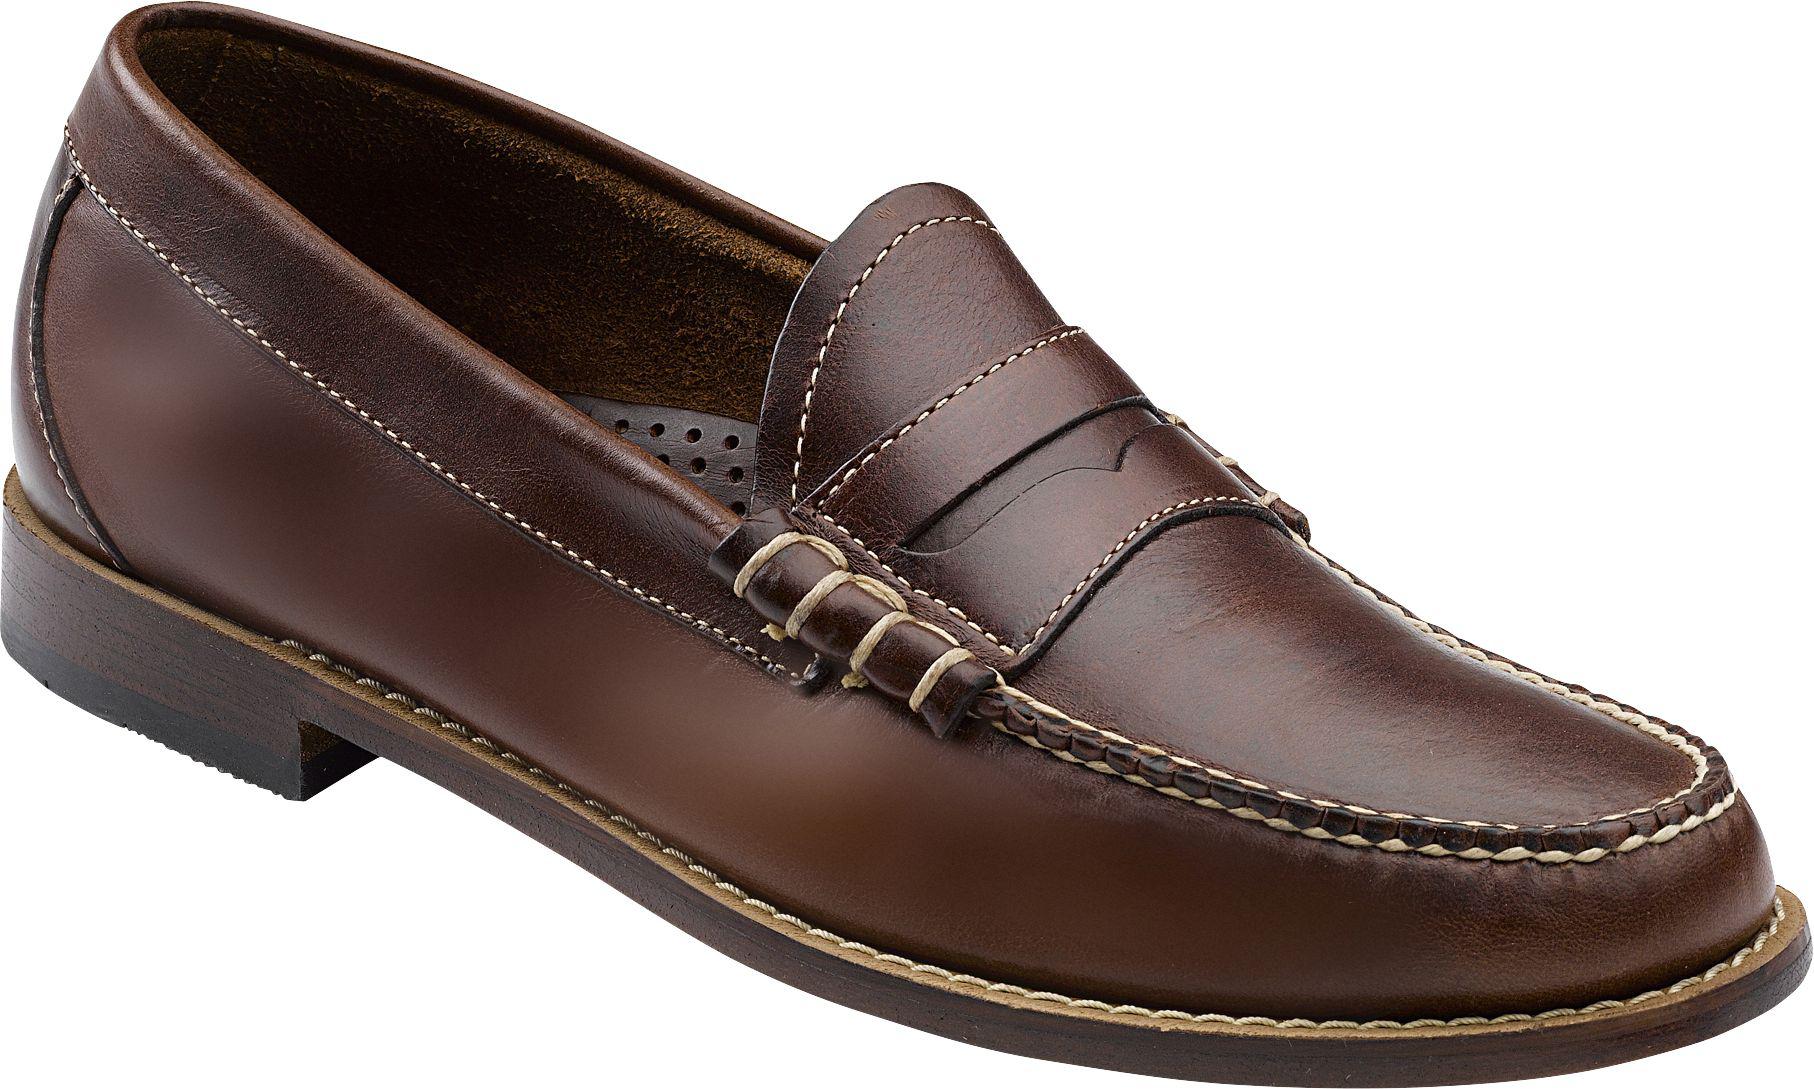 Lyst - Jos. A. Bank G. H. Bass Larson Penny Loafers in Brown for Men